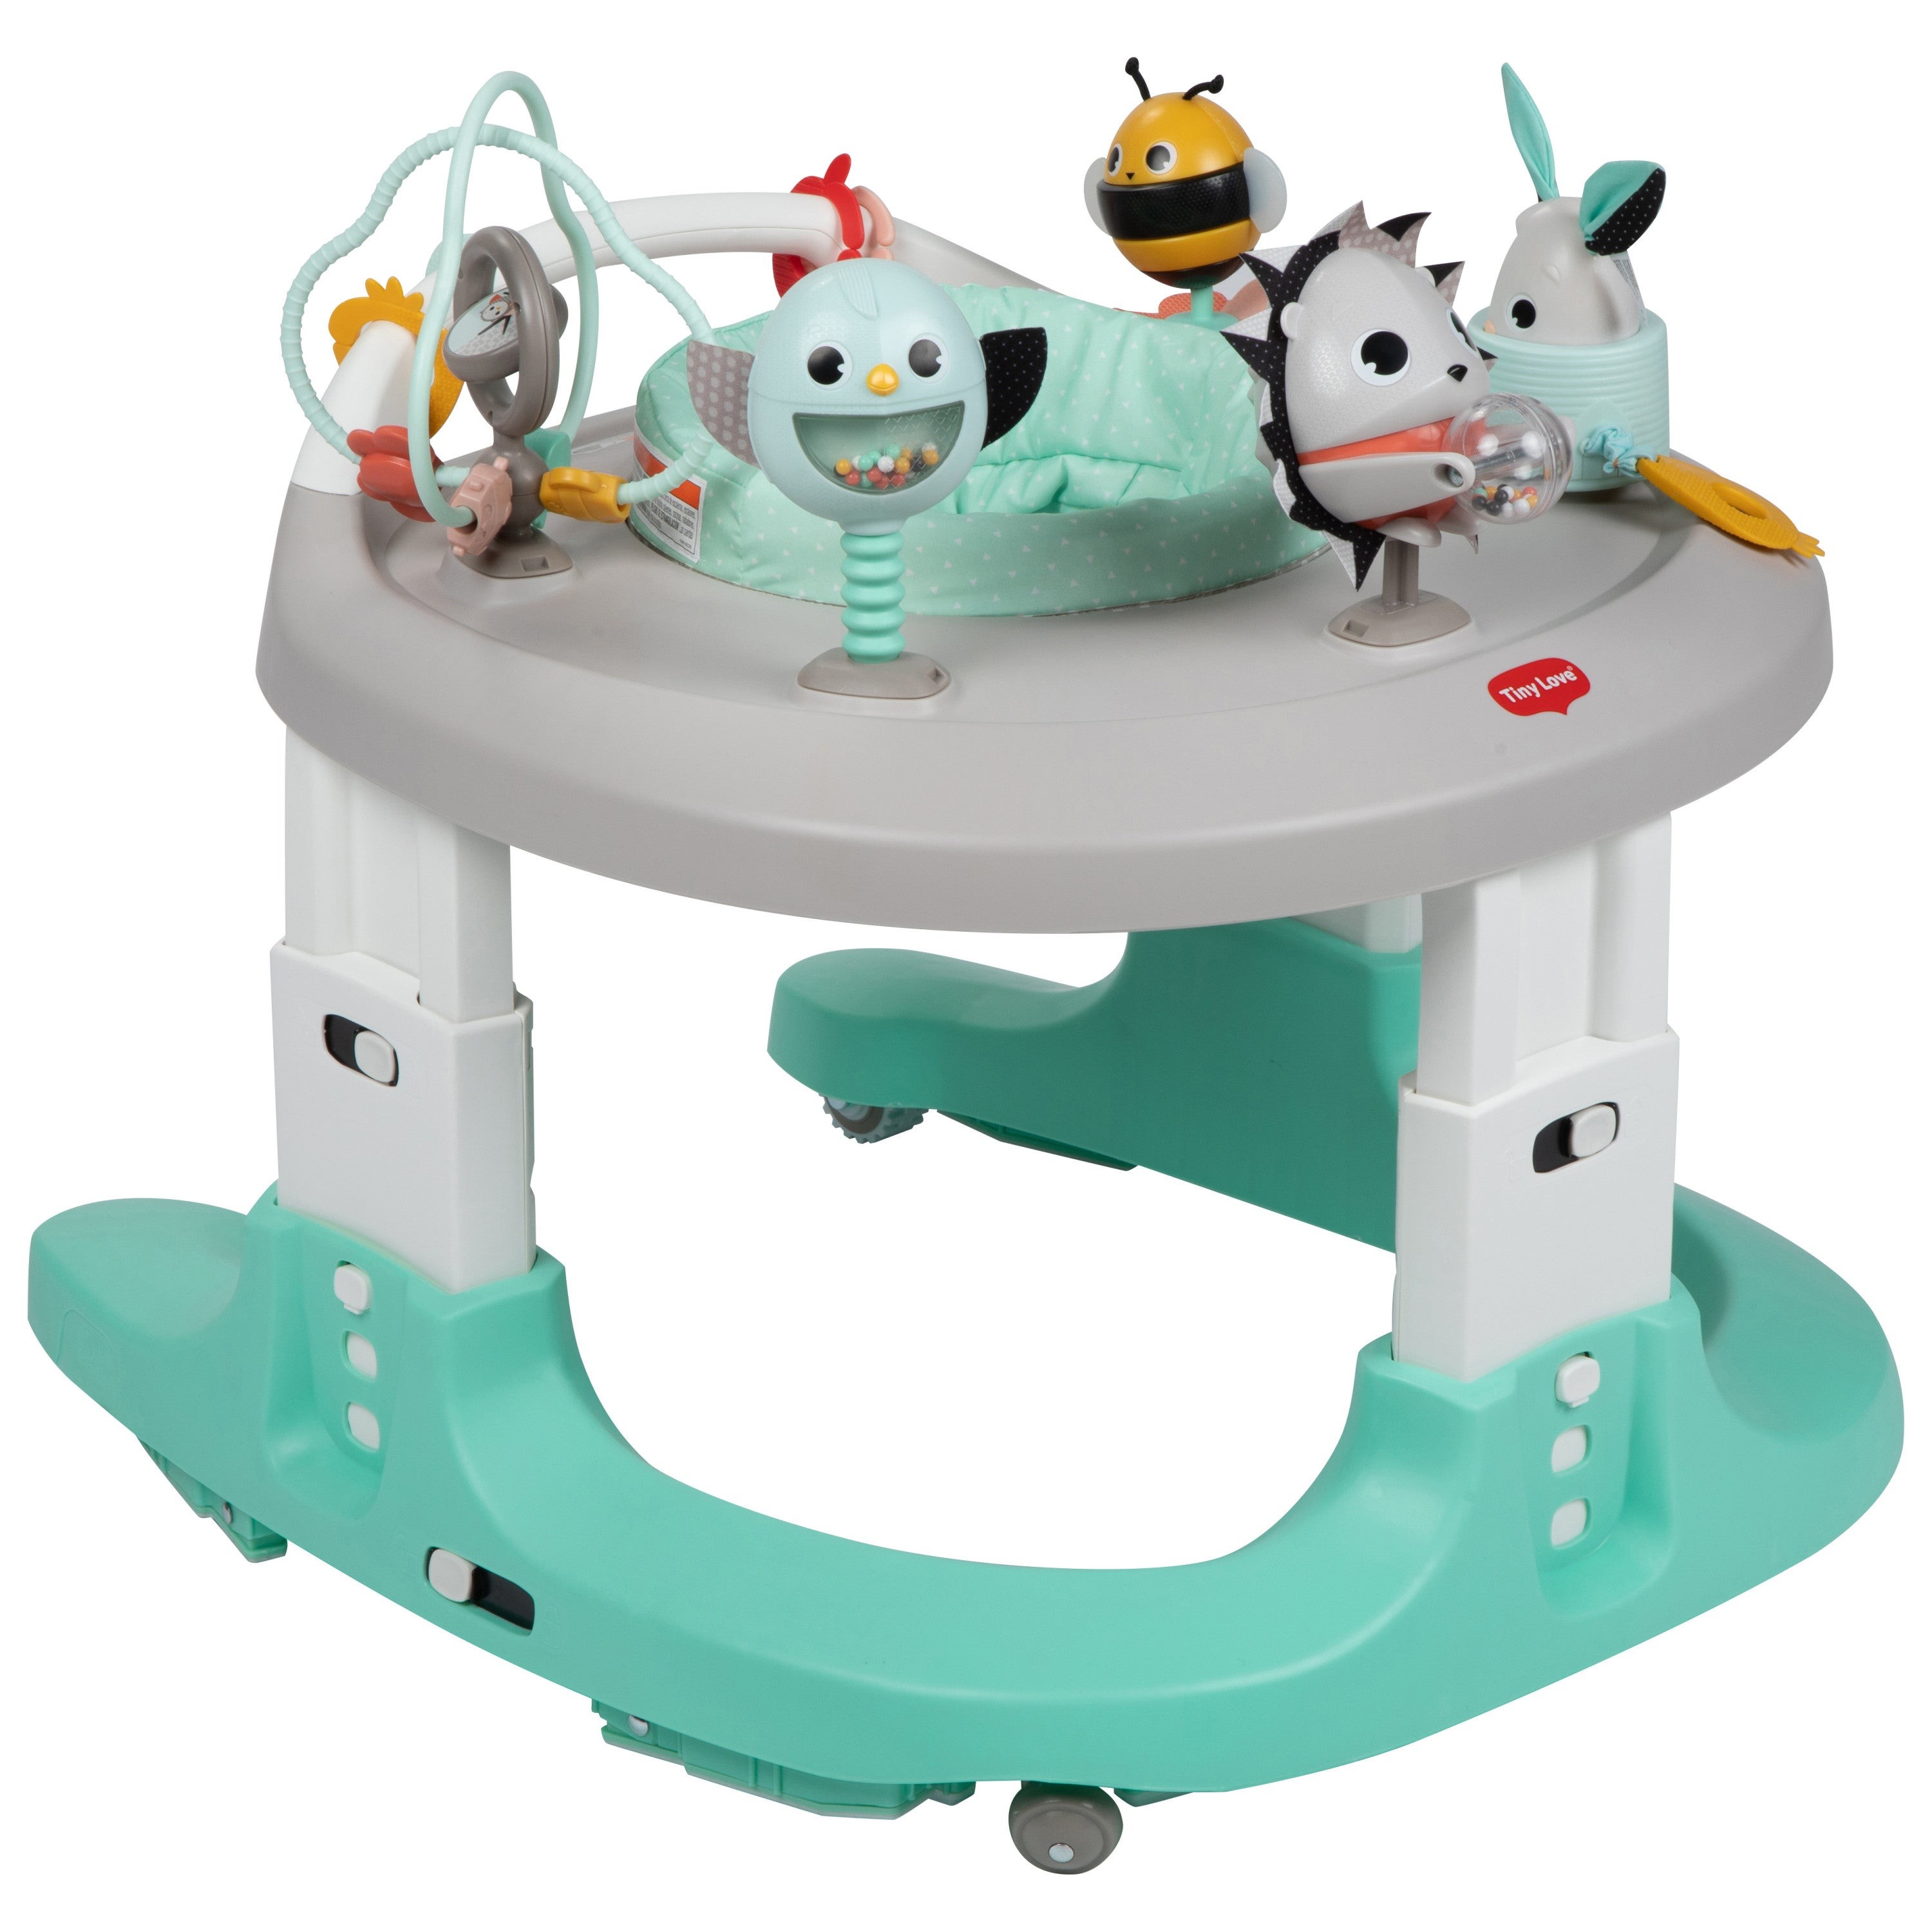 Magical Tales 4-in-1 Here I Grow Mobile Activity Center